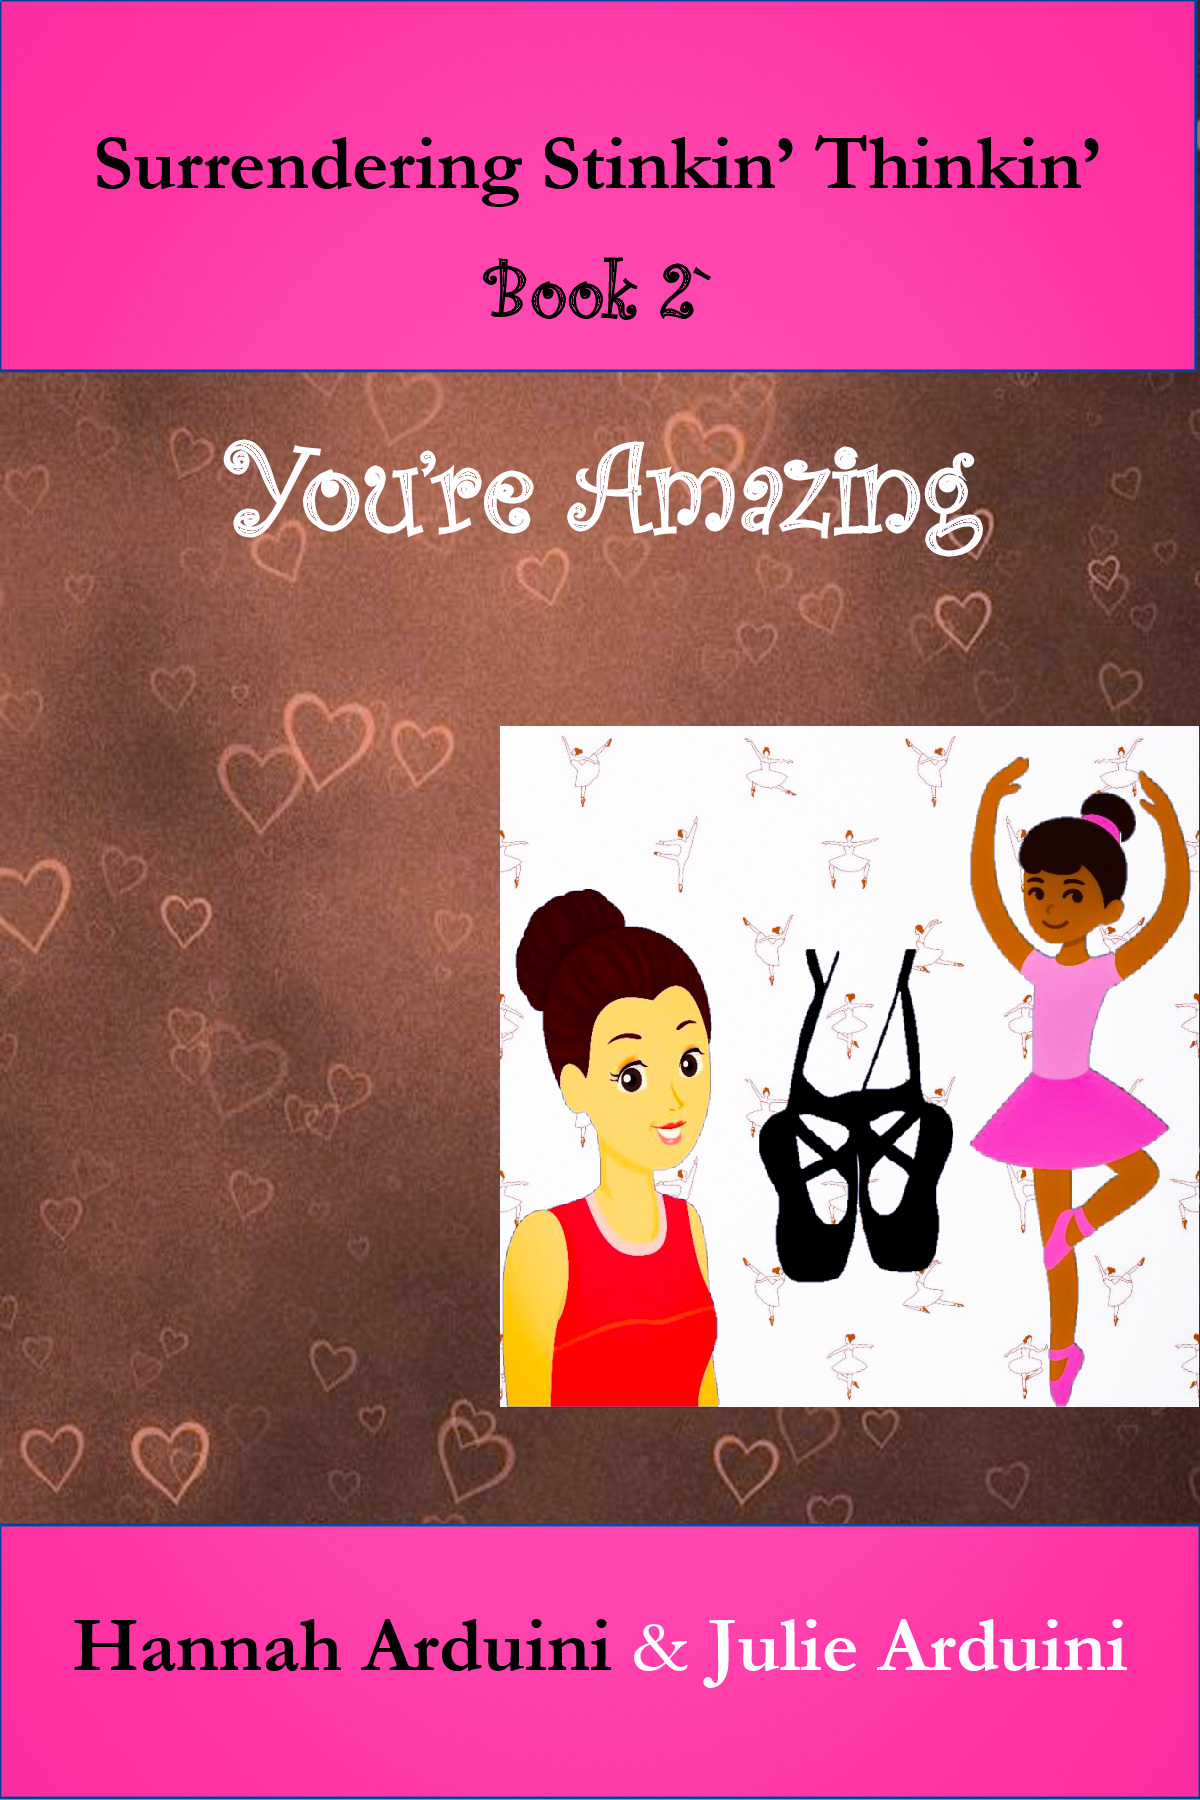 FREE: You’re Amazing by Julie Arduini